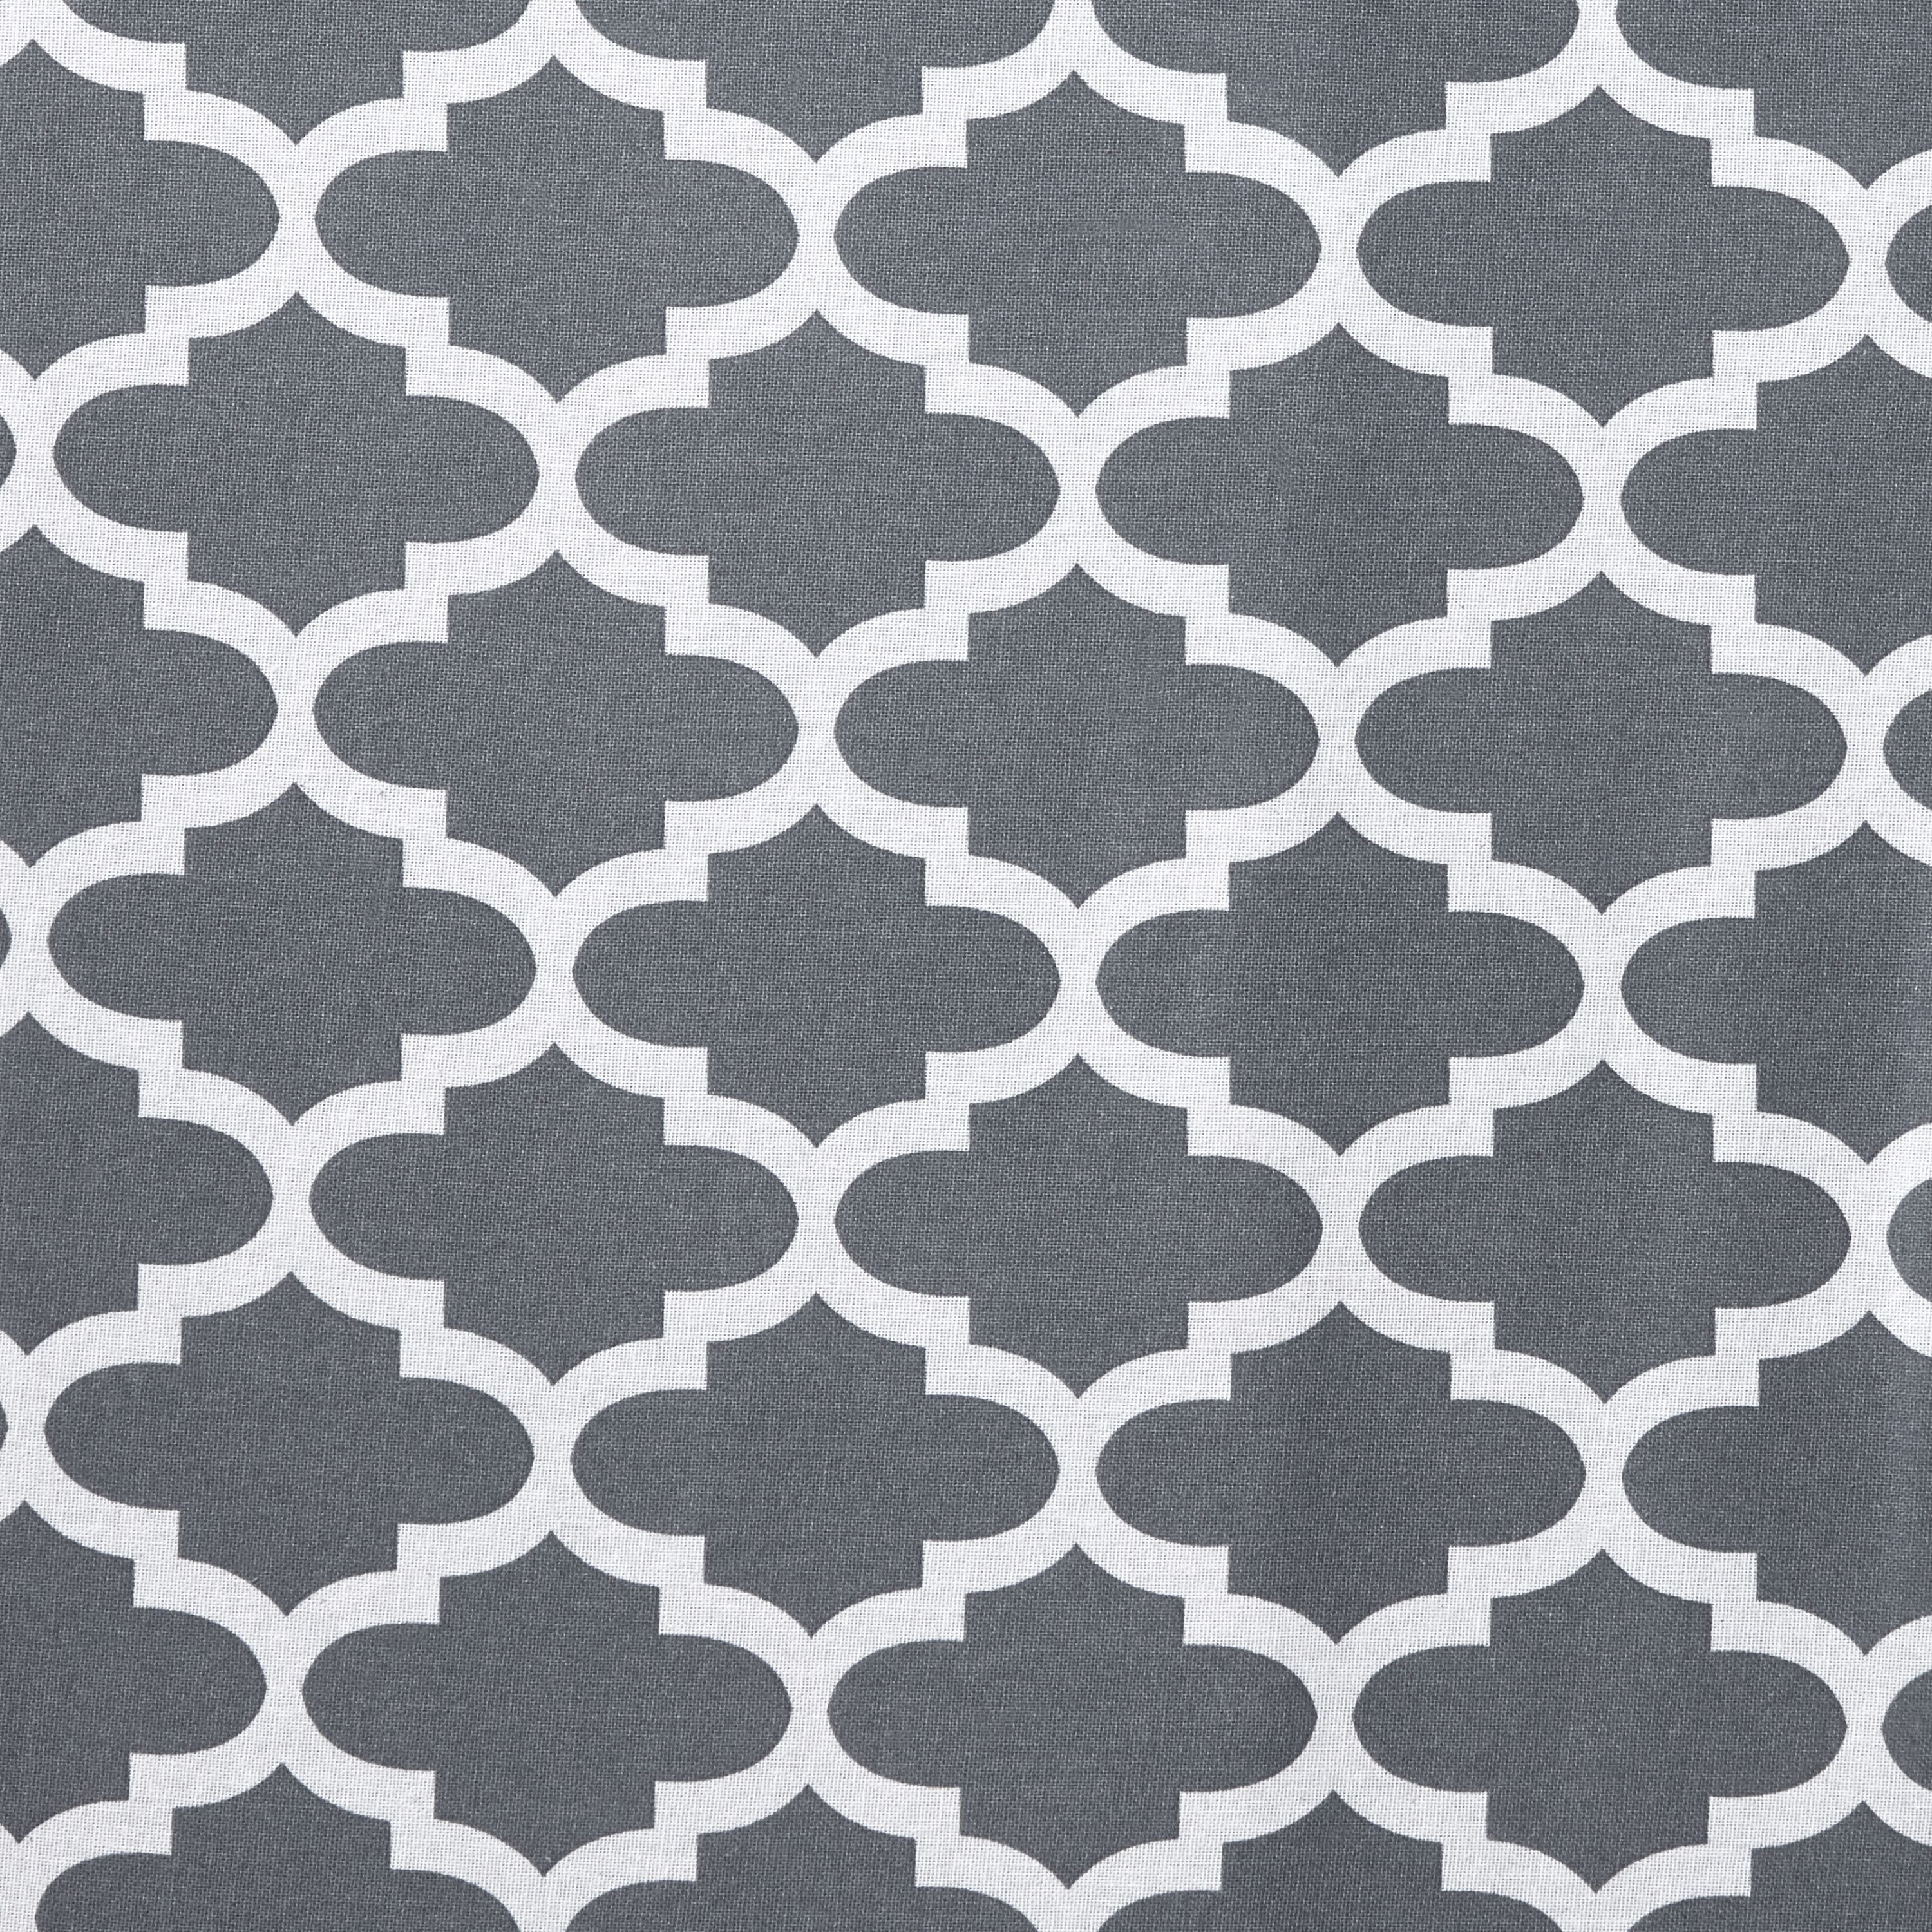 Mainstays Deluxe Lattice Grey Removable Ironing Board Cover 54" x 15" (Ironing board not included) - image 3 of 4